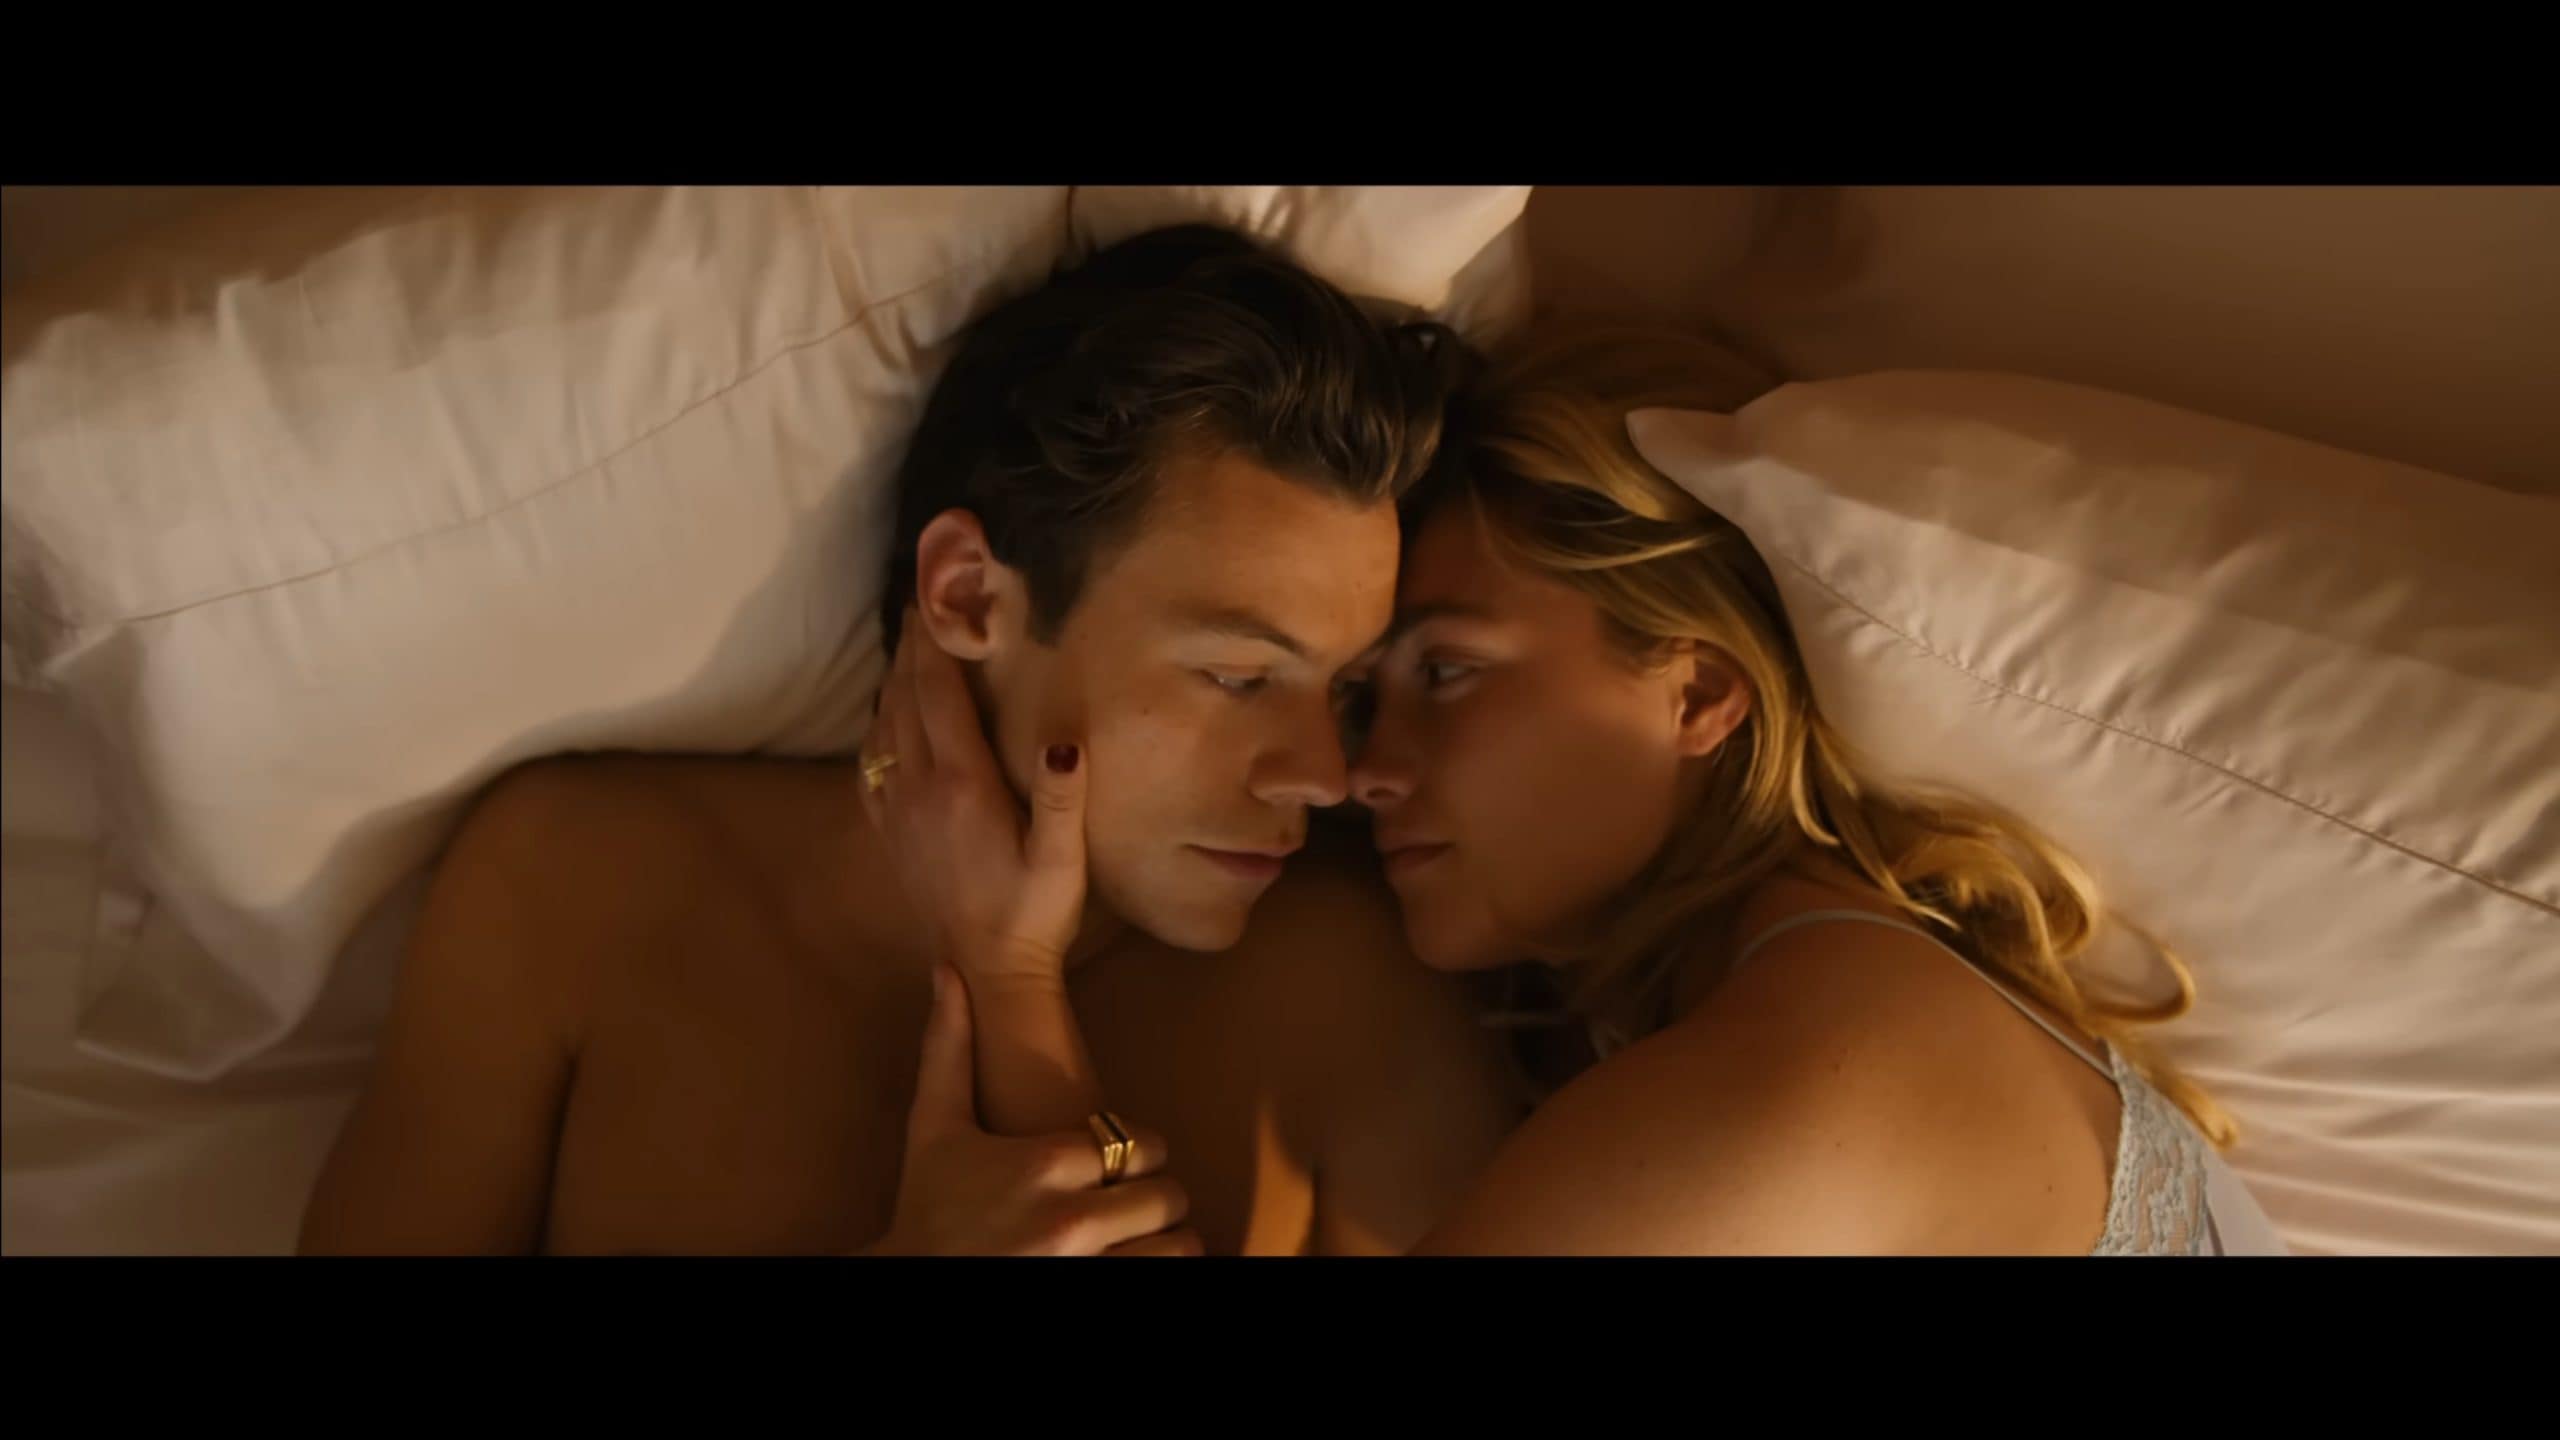 Jack (Harry Styles) and Alice (Florence Pugh) in bed together